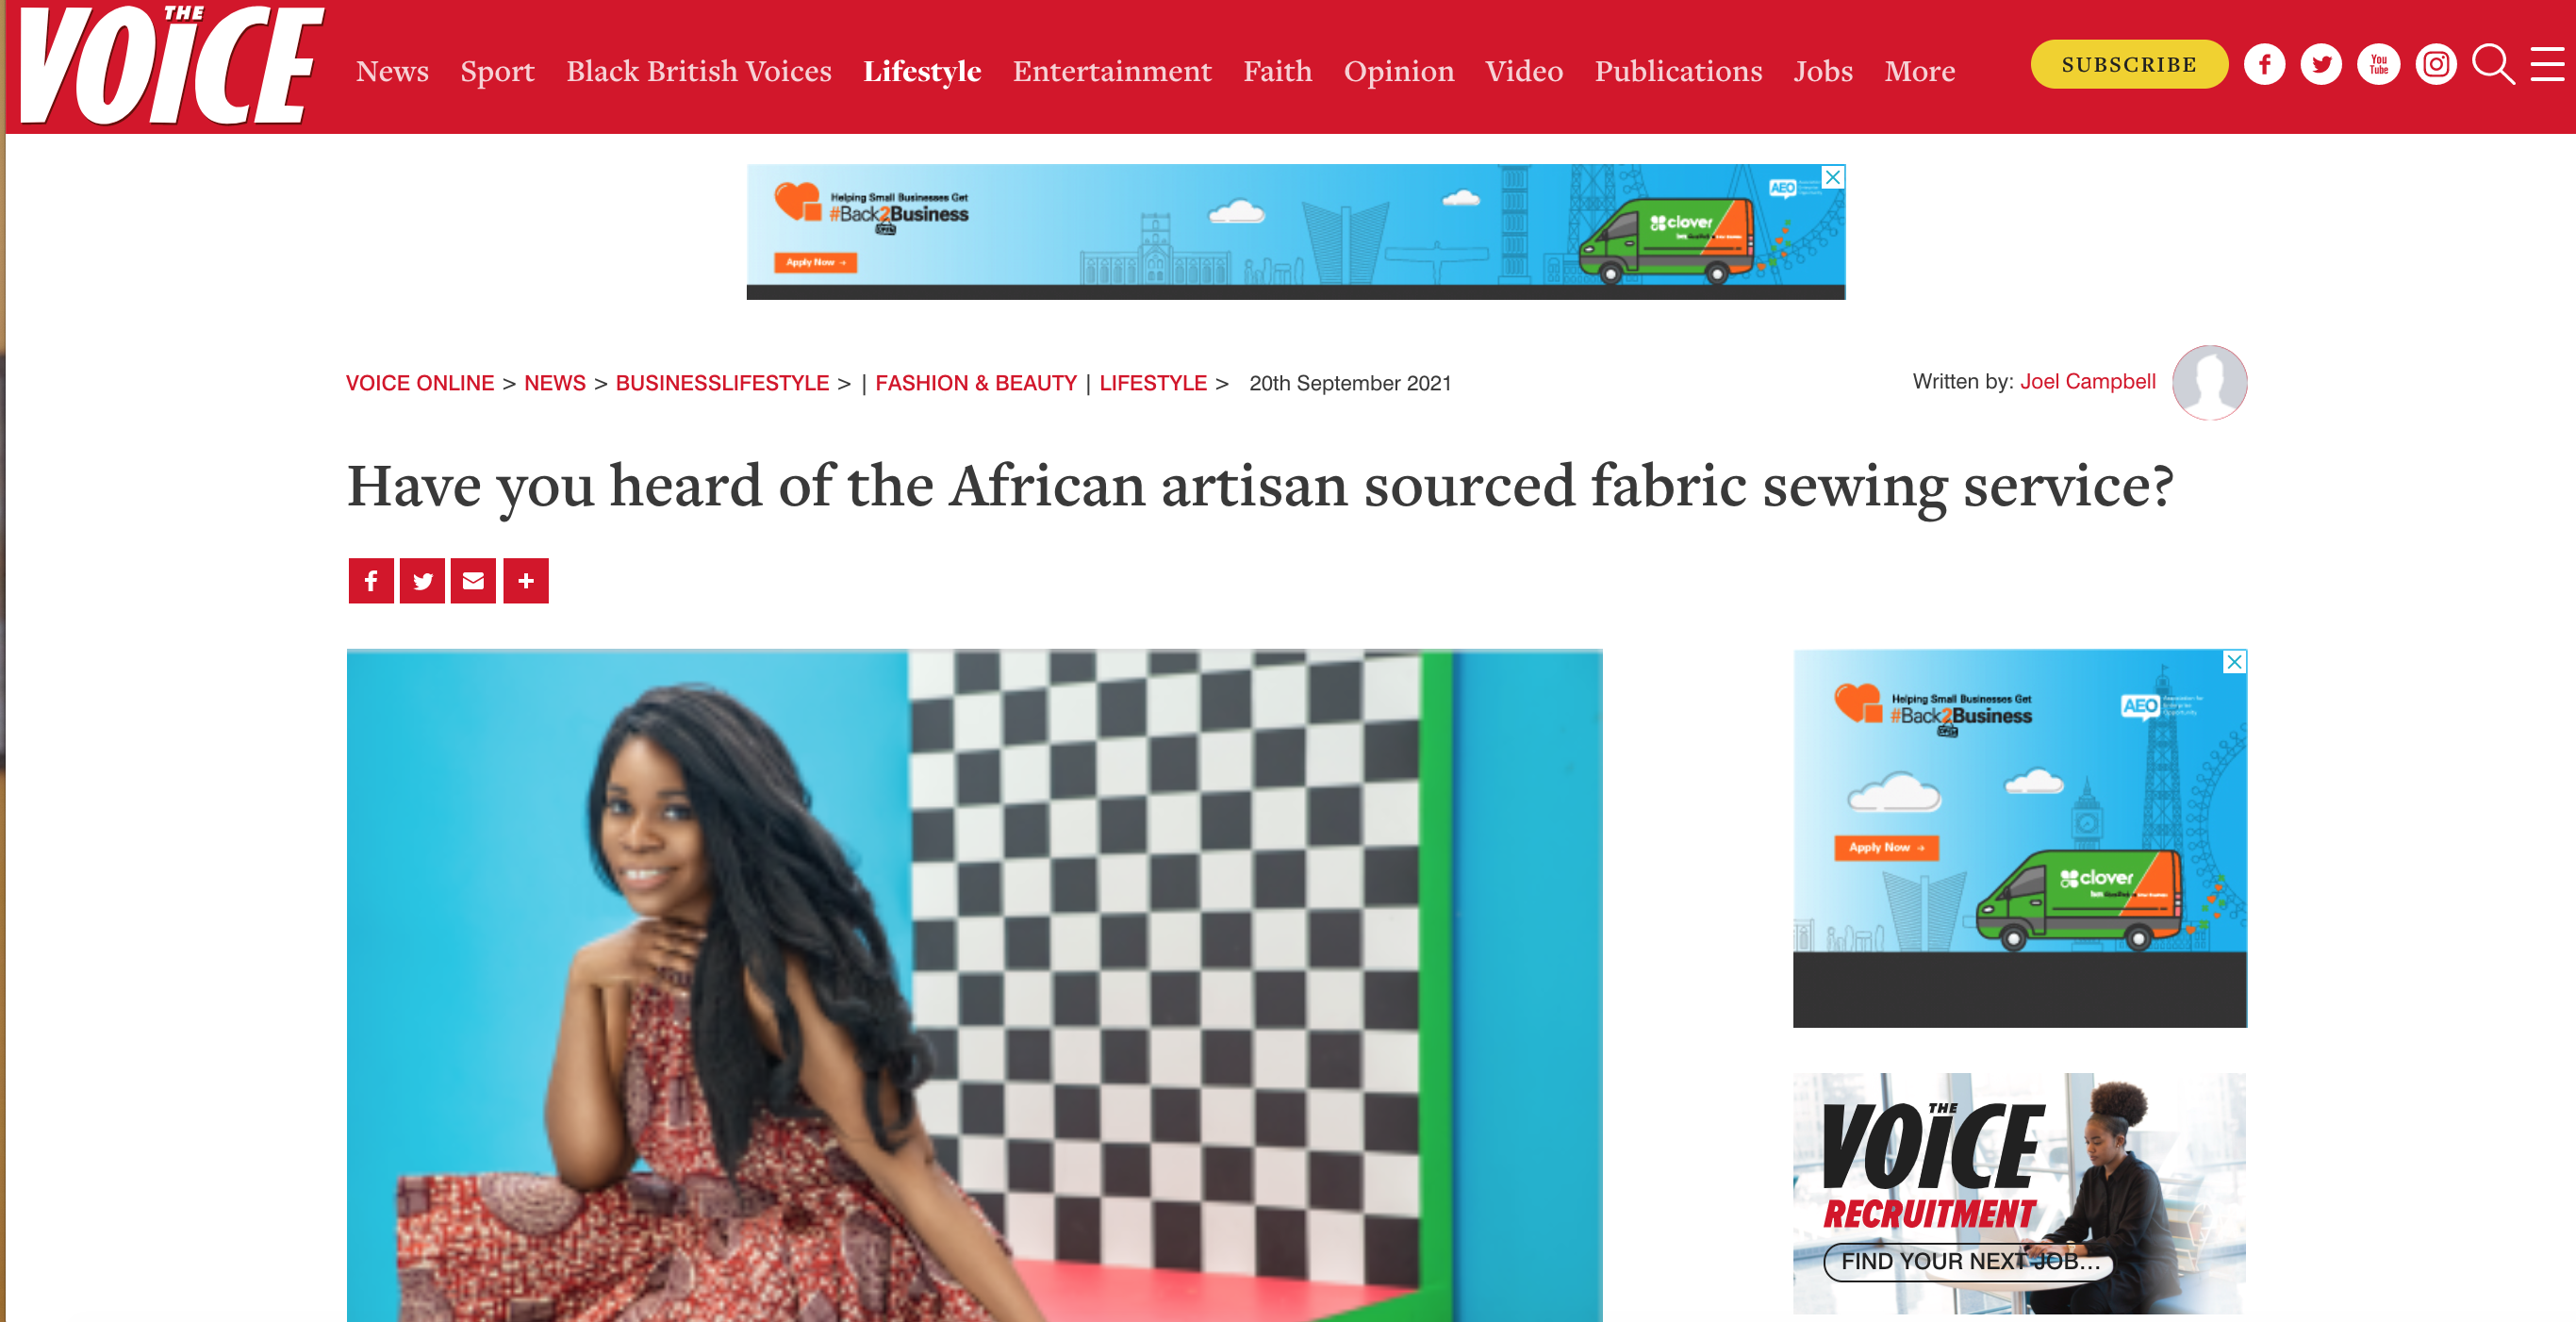 African artisan sourced fabric sewing service in the press!